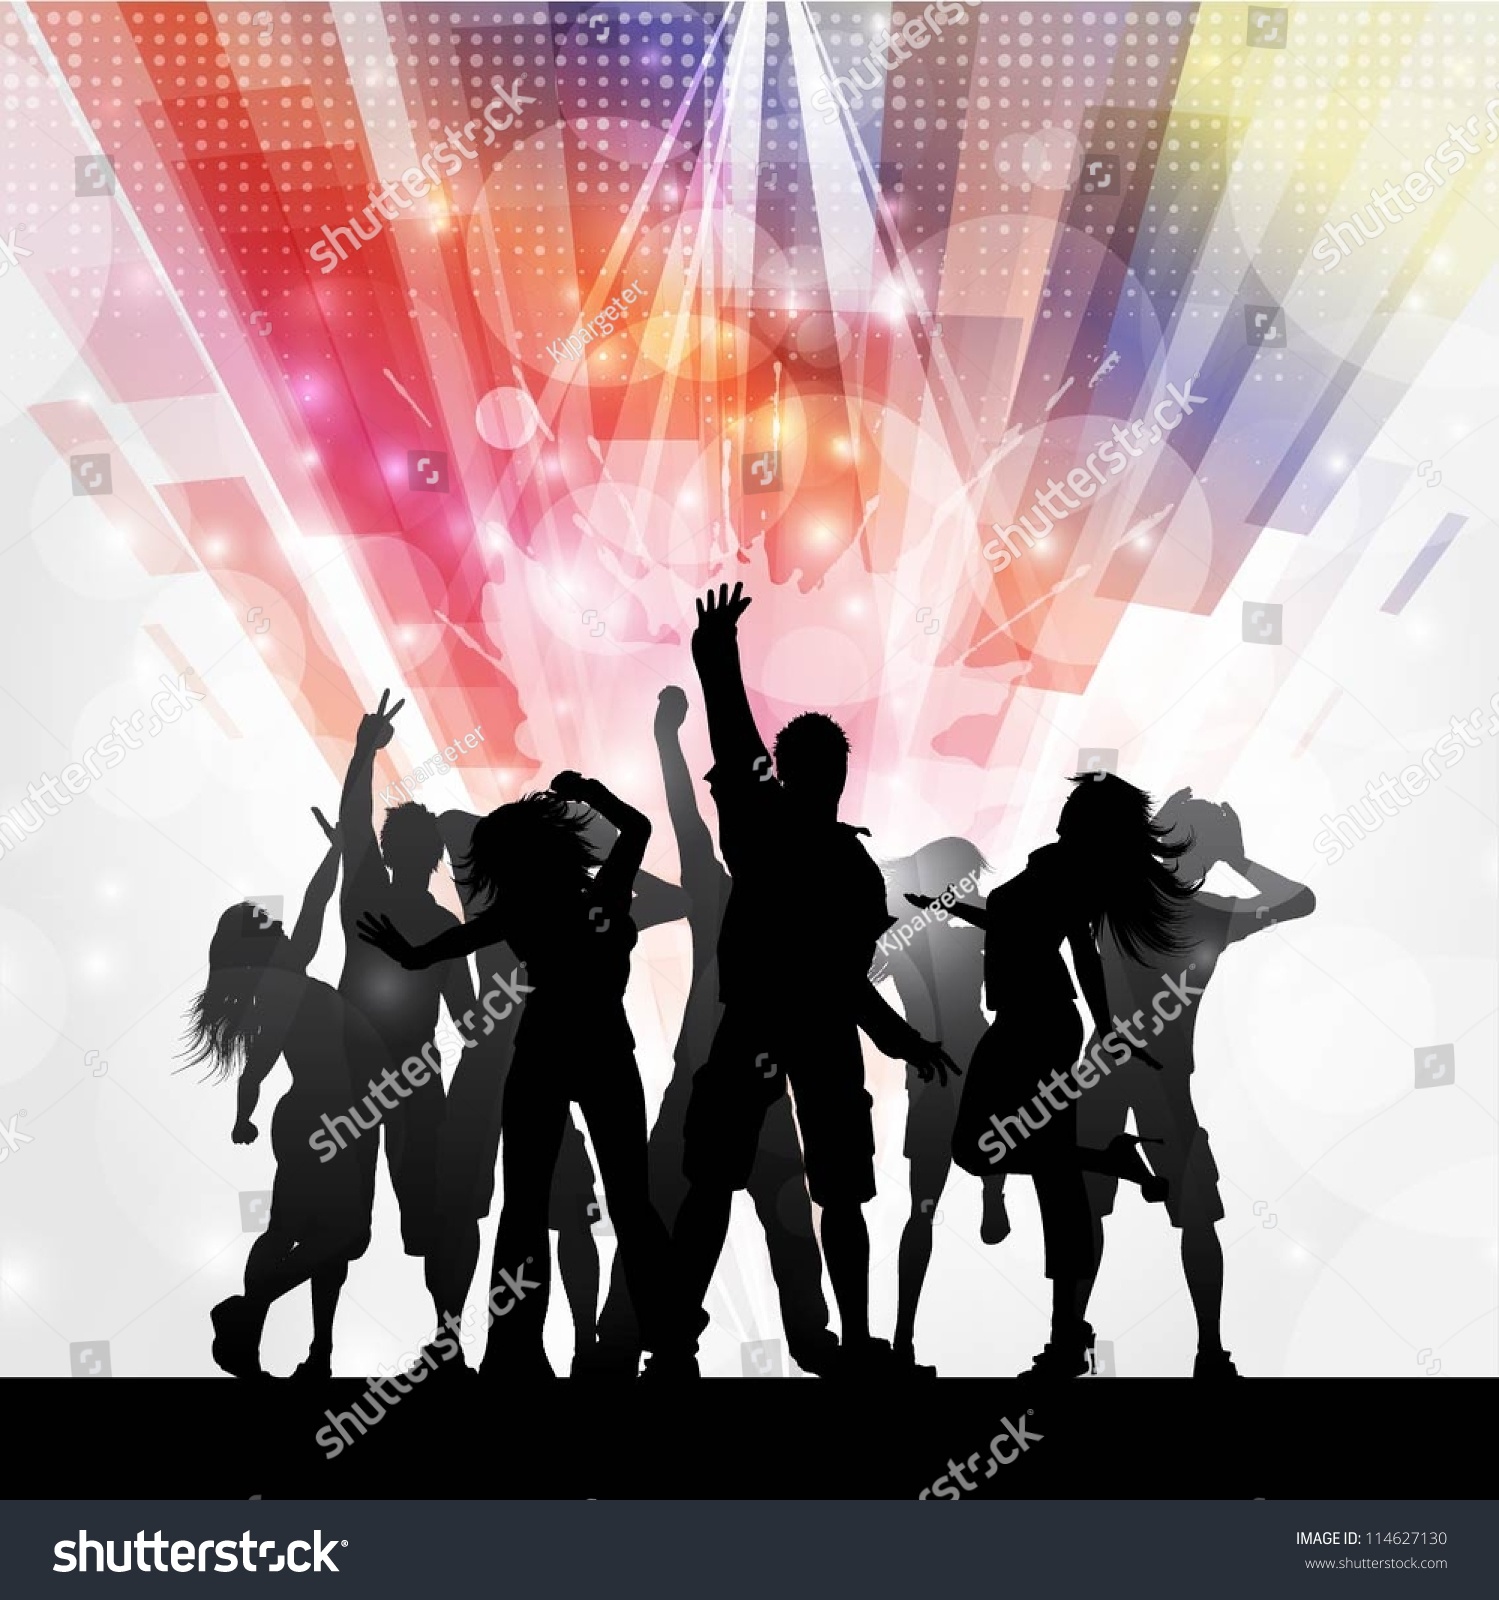 Party People Background Stock Vector Illustration 114627130 : Shutterstock